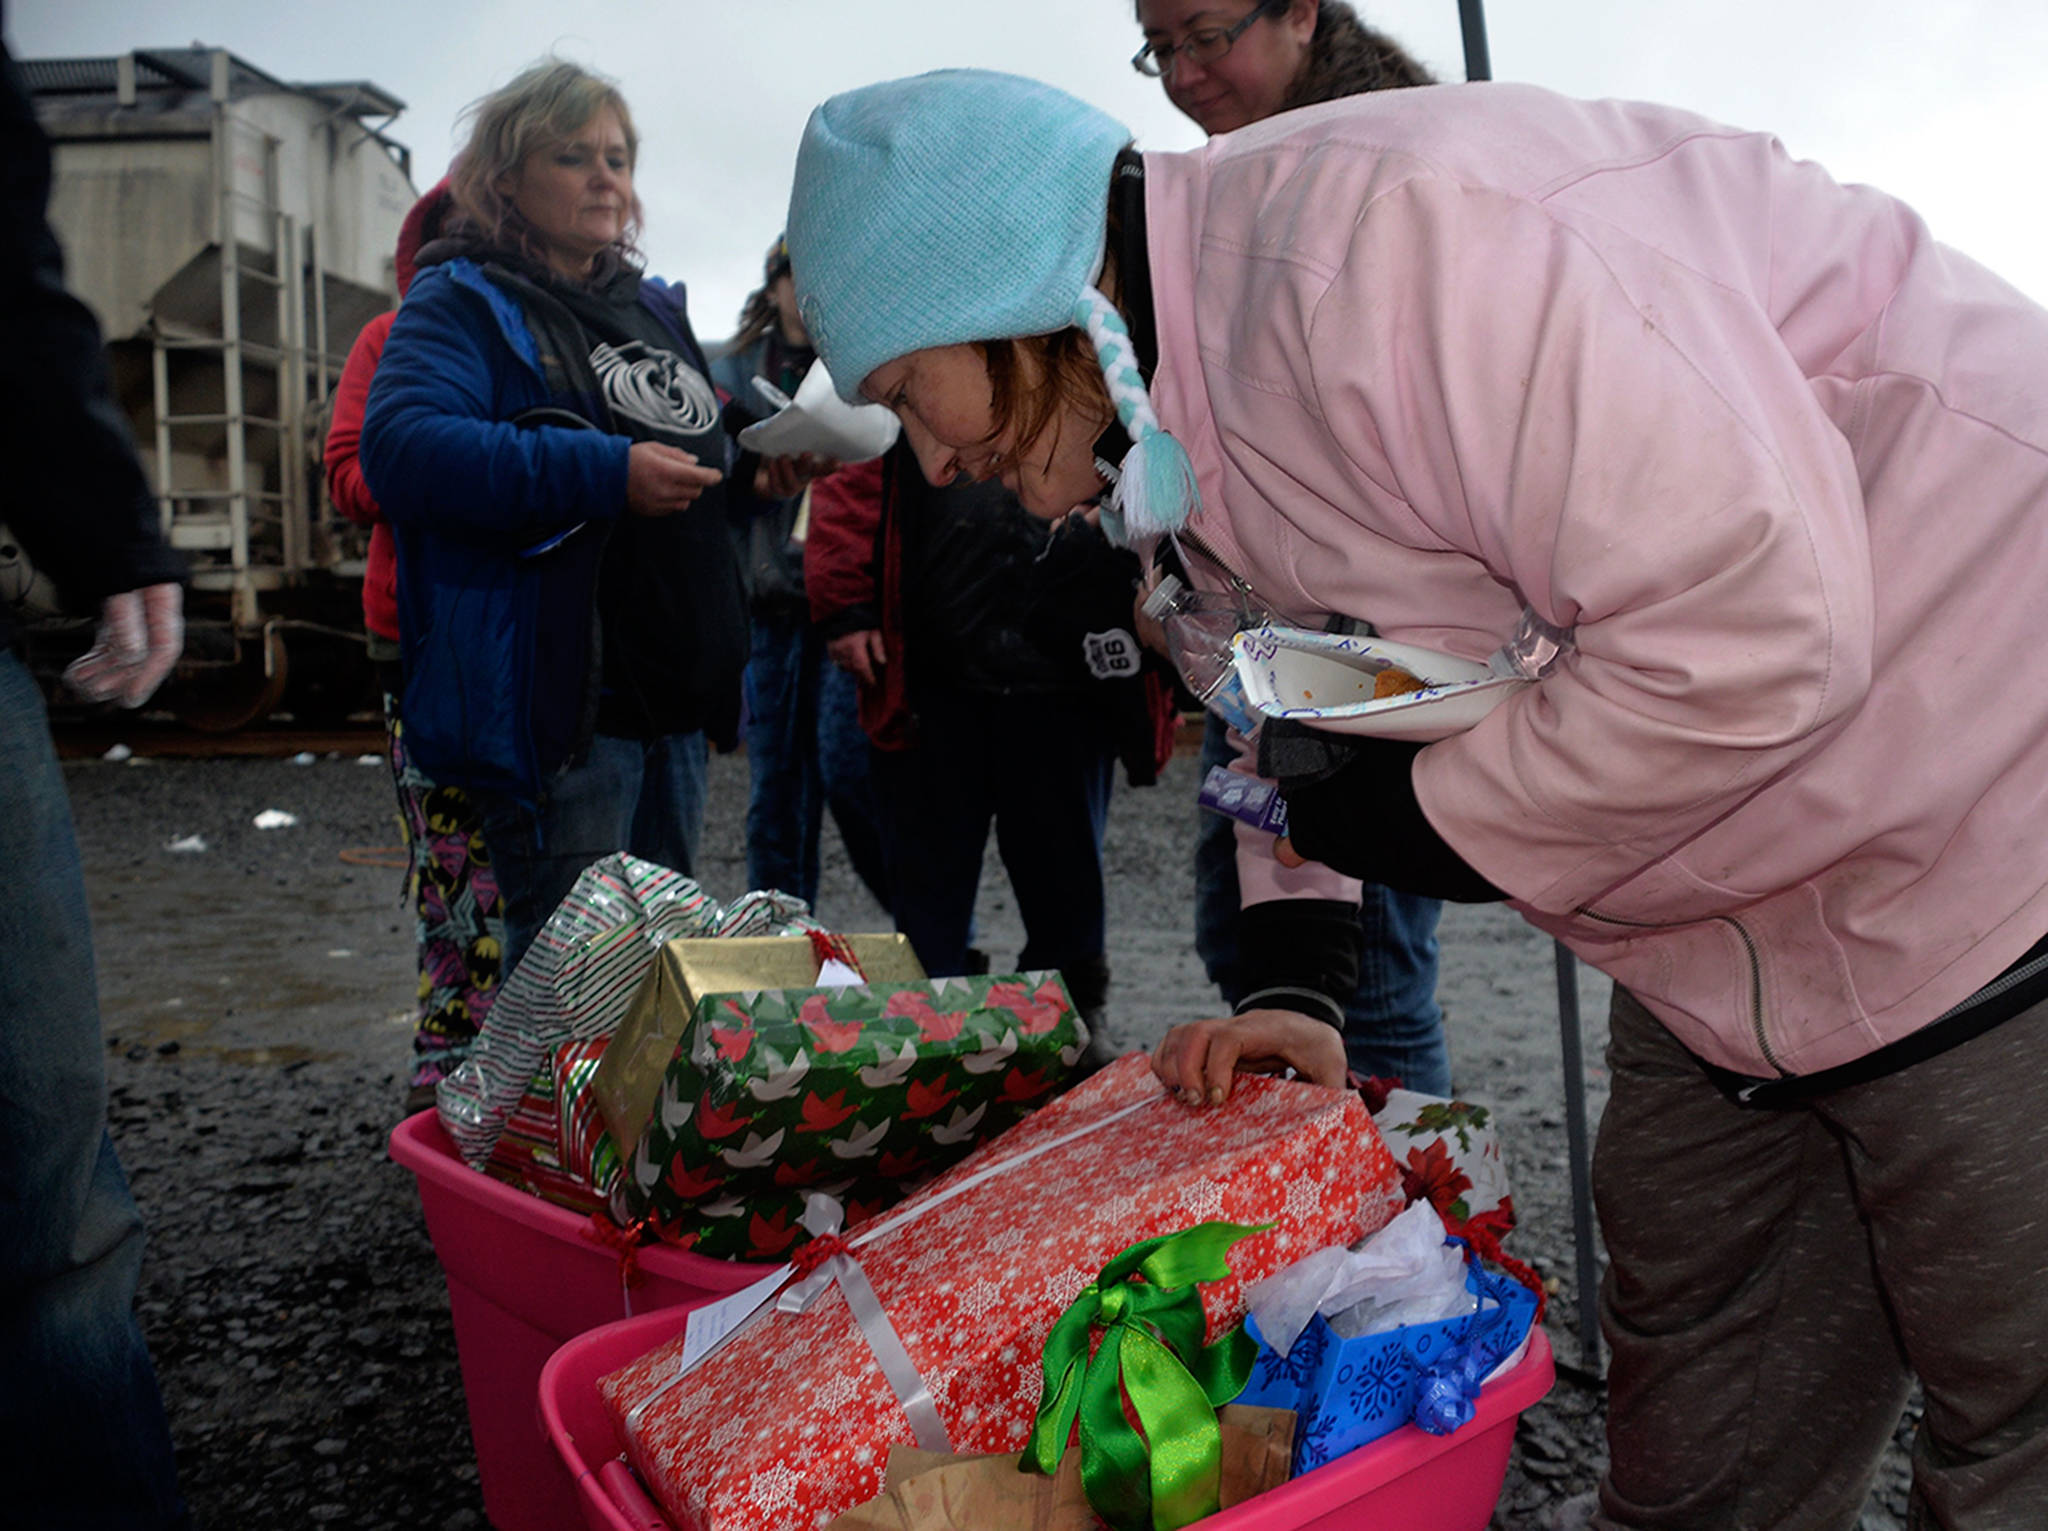 (Louis Krauss | Grays Harbor News Group) Mandy Nottingham peruses wrapped presents given away at Aberdeens riverfront homeless camp on Wednesday.